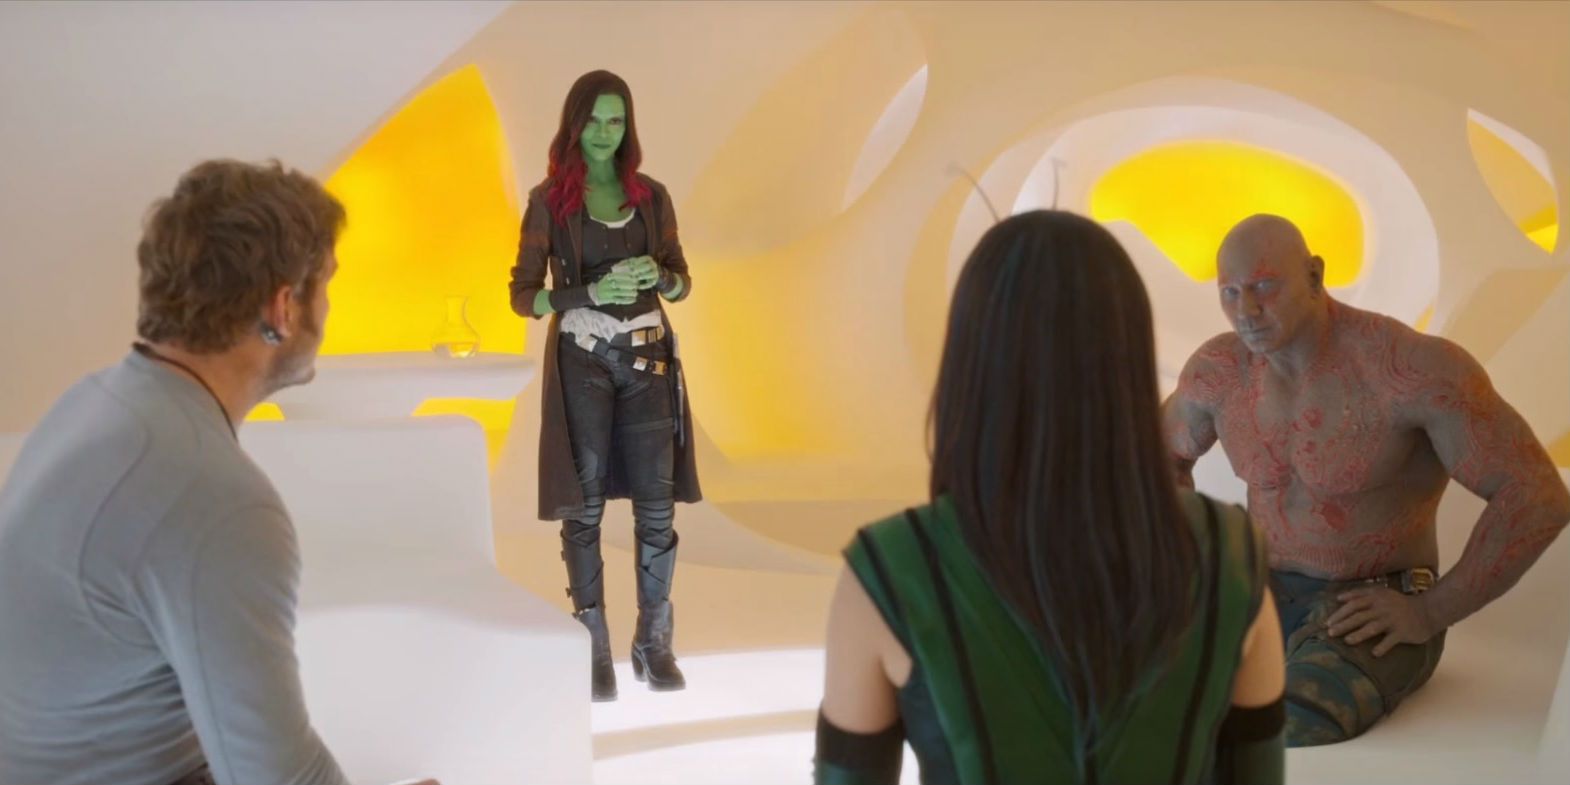 Guardians of the Galaxy Vol. 2 - Gamora and cup